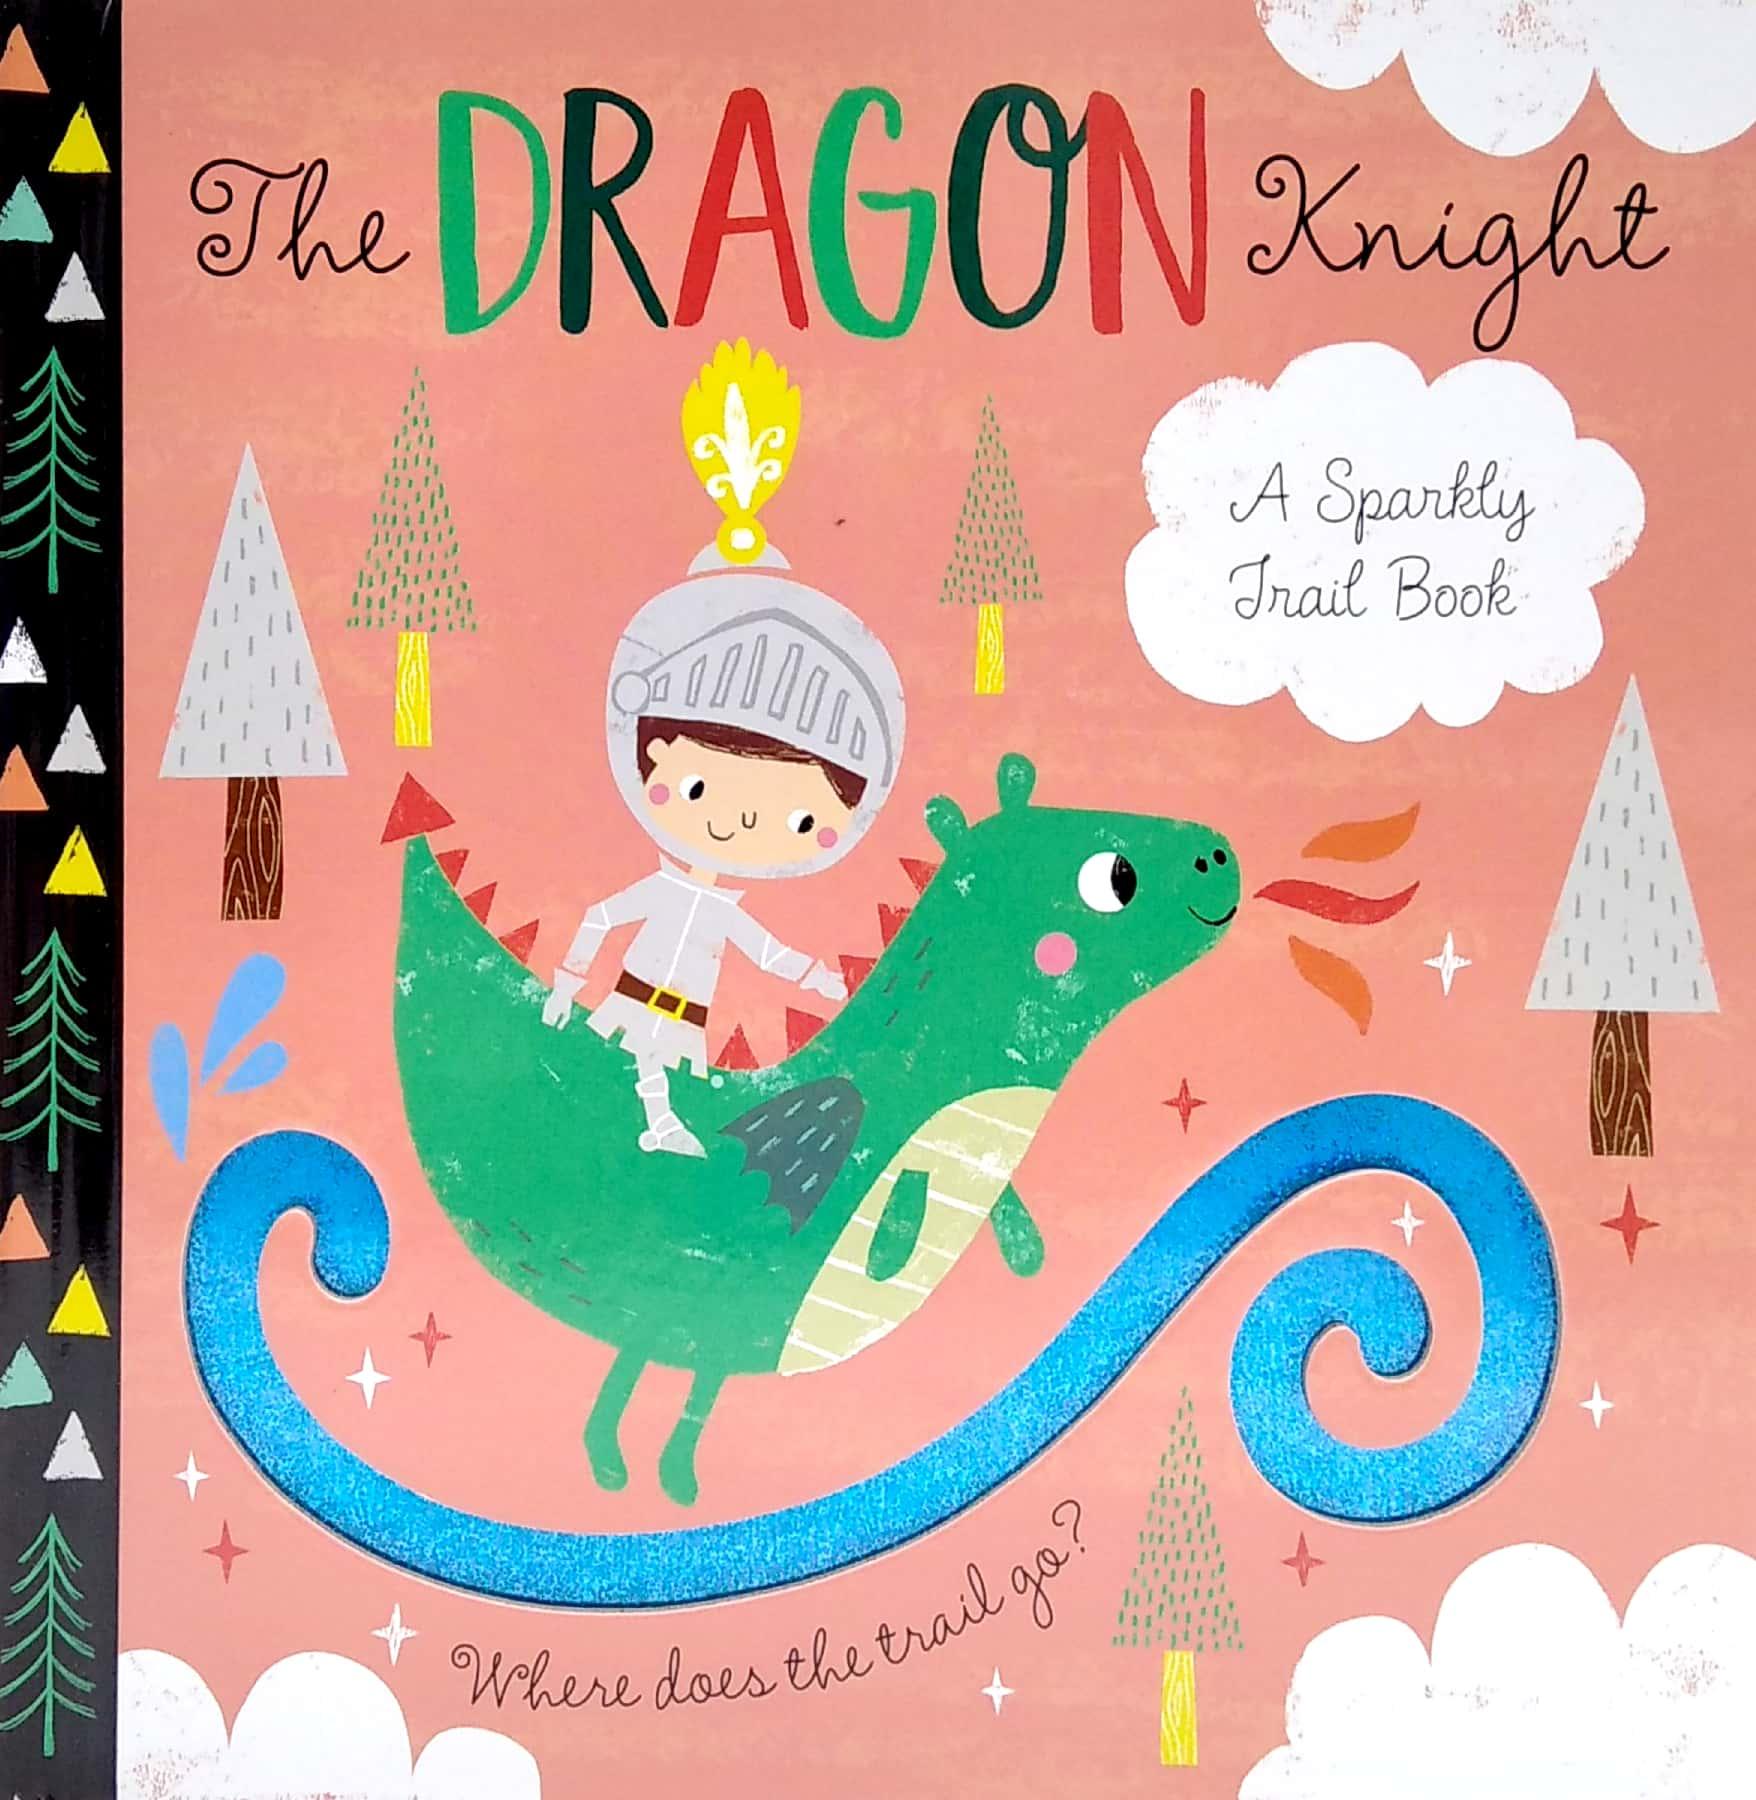 A Sparkly Trail Book: The Dragon Knight